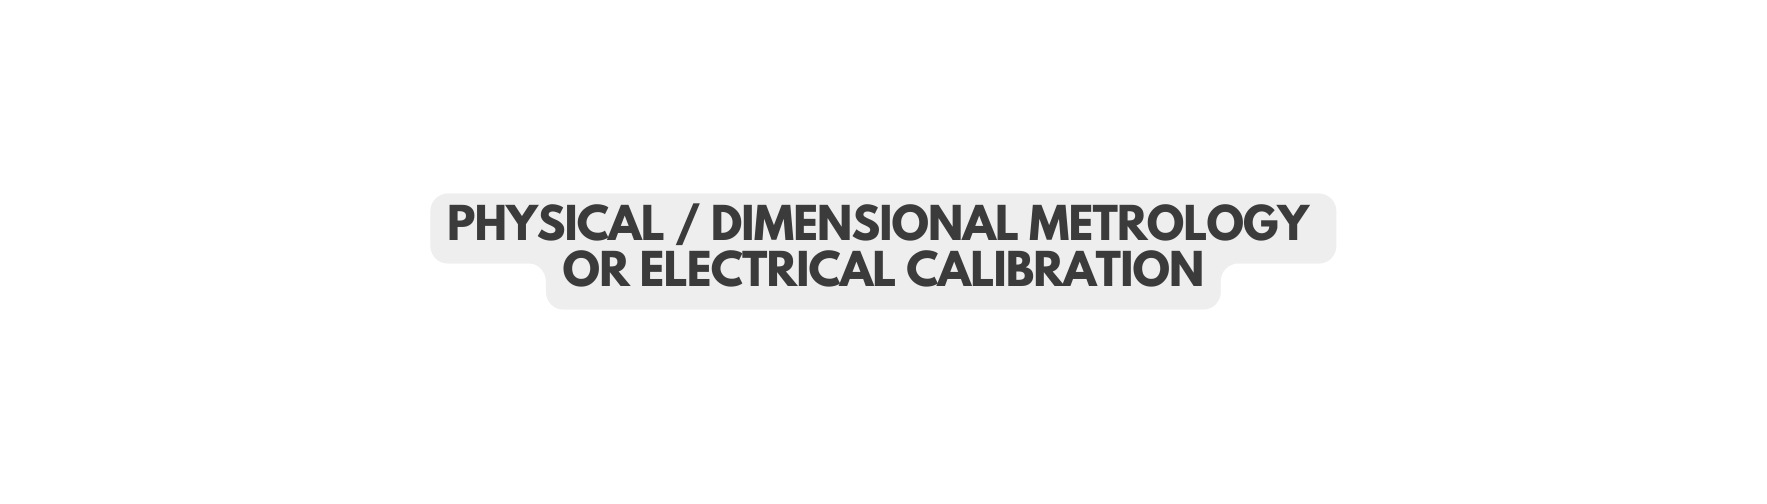 PHYSICAL DIMENSIONAL METROLOGY OR ELECTRICAL CALIBRATION